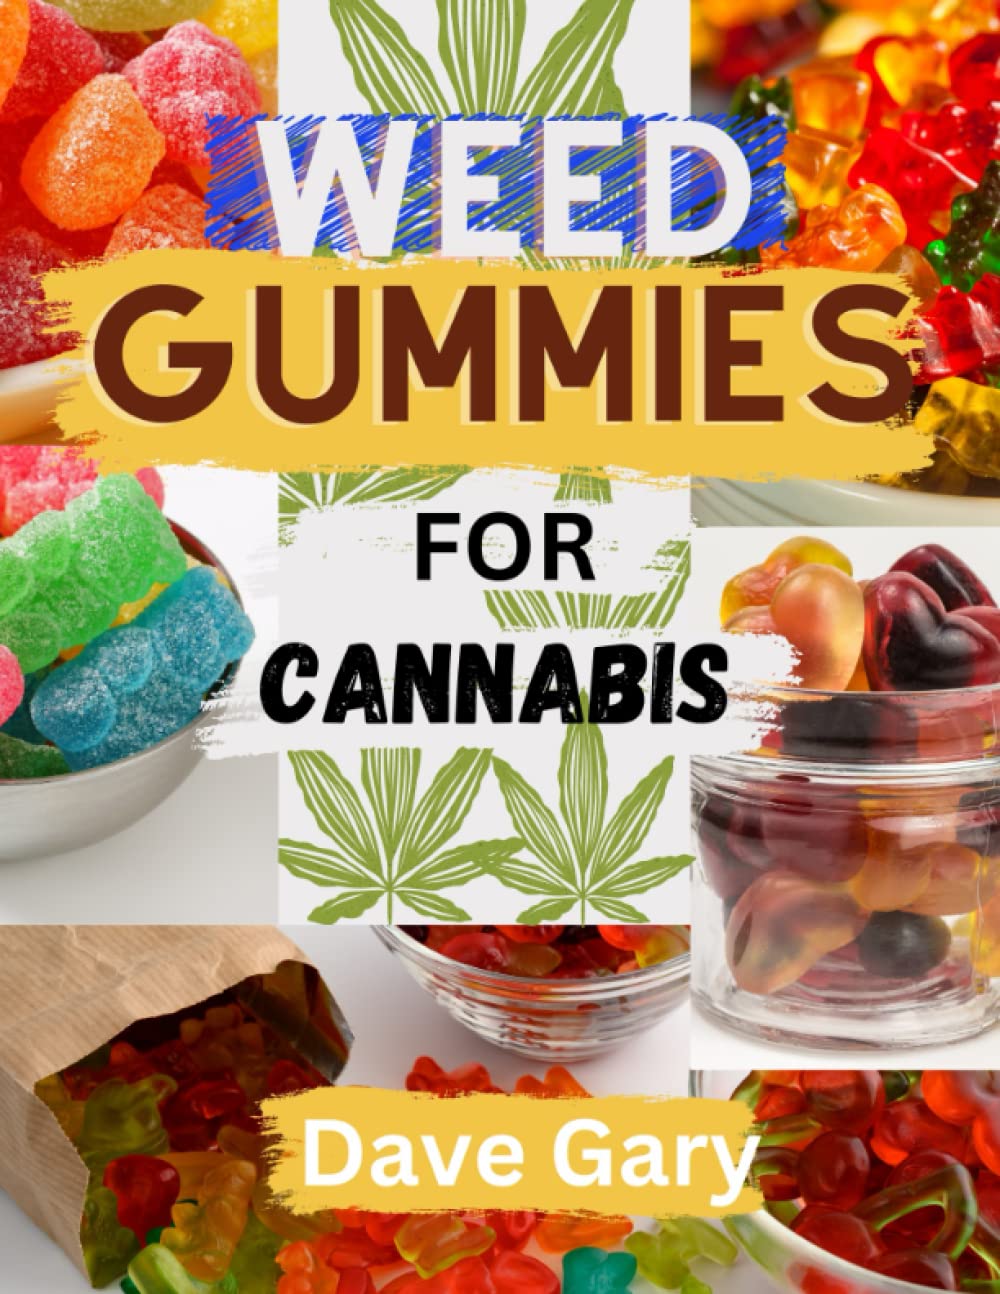 Weed Gummies Cookbook For Cannabis: Easy Recipes for making Cannabis-infused Candies, THC and CBD Edibles (with pictures) (Marijuana A-Z Series)